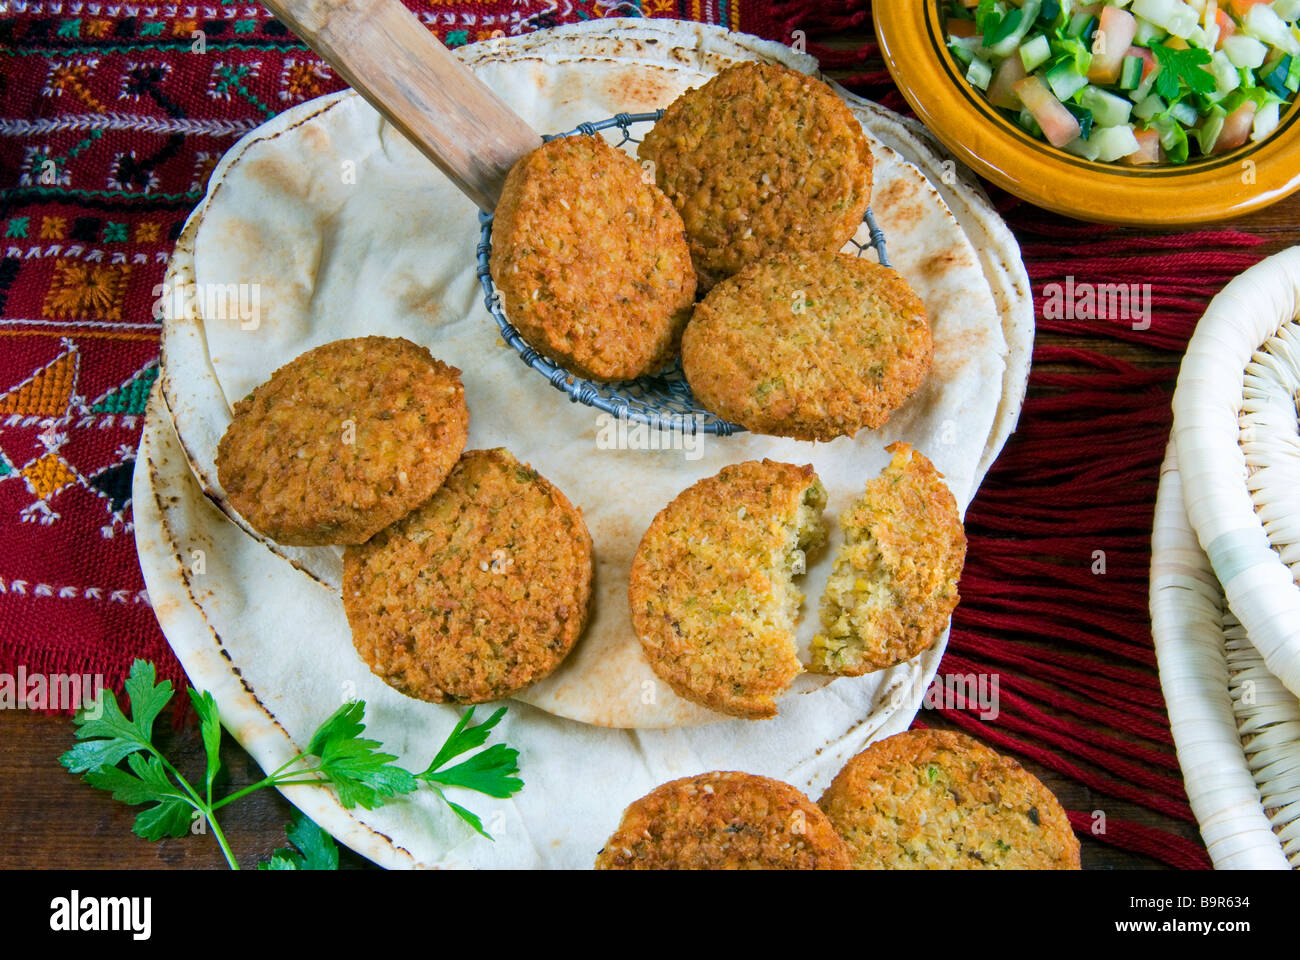 Falafel Chickpeas croquettes Arabic countries Arabic cooking Stock Photo